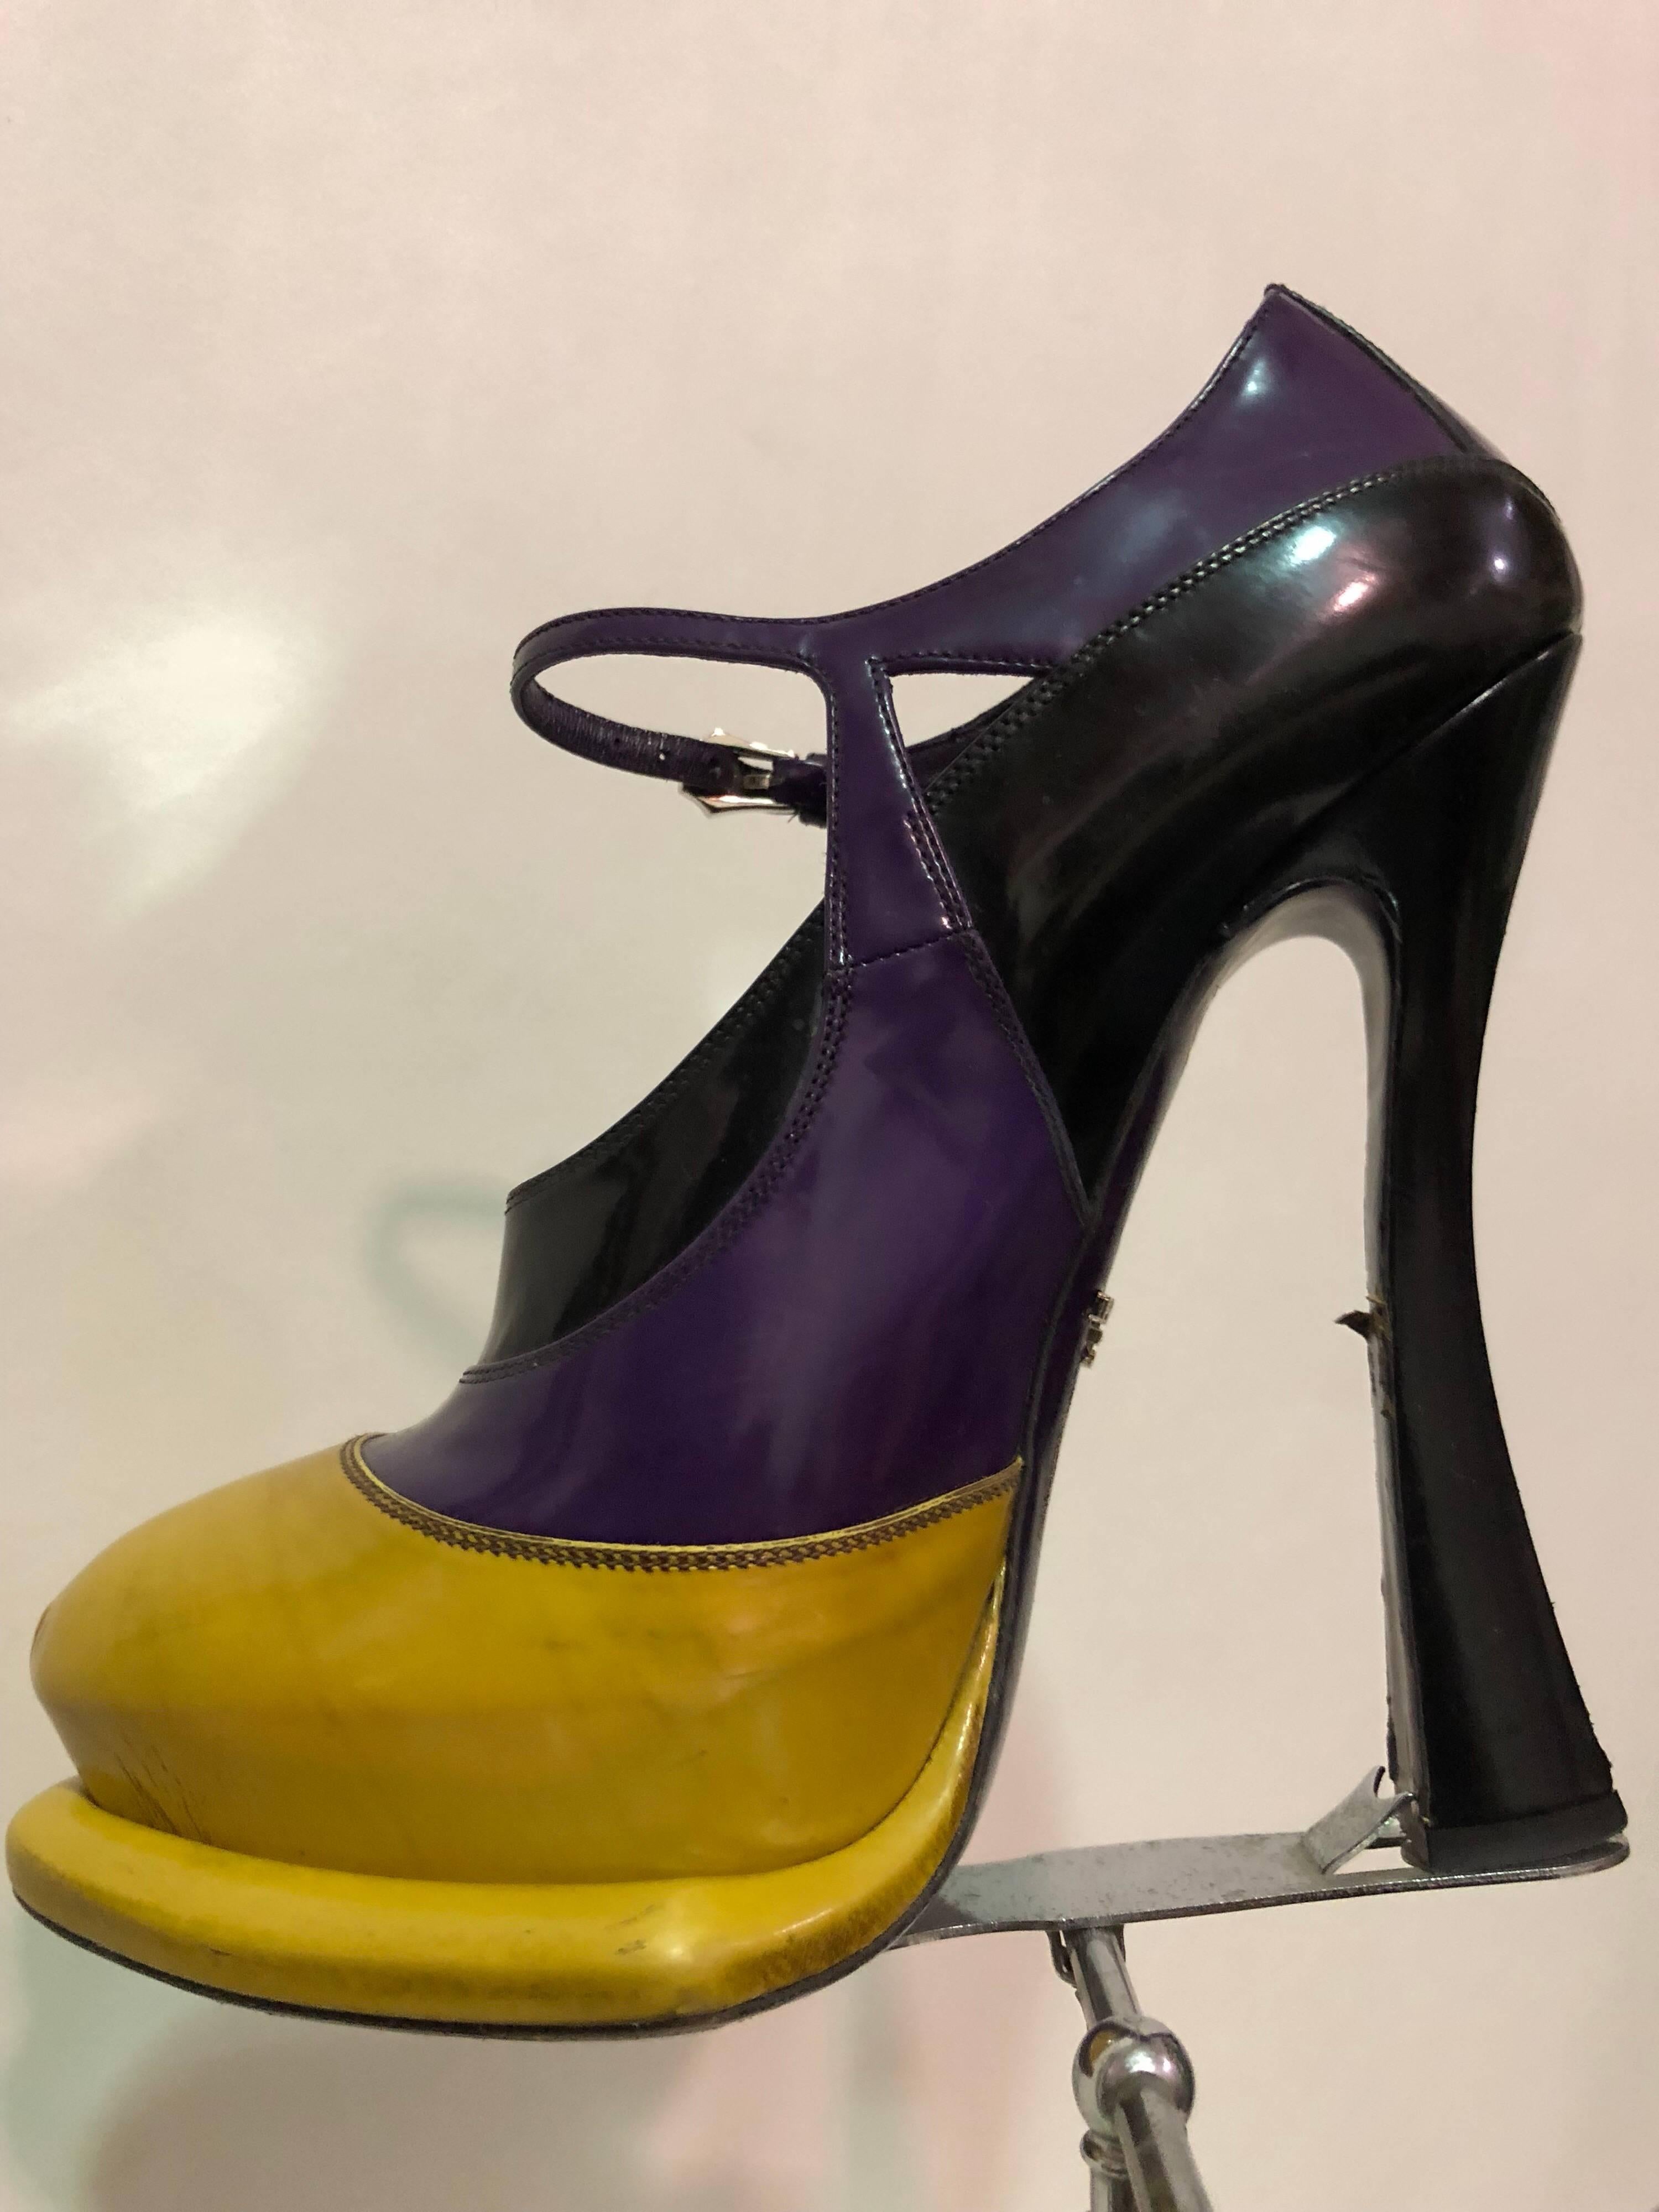 Prada Canary Yellow Purple & Black Fetish-Style Platform Mary Jane Heels In Excellent Condition For Sale In Gresham, OR